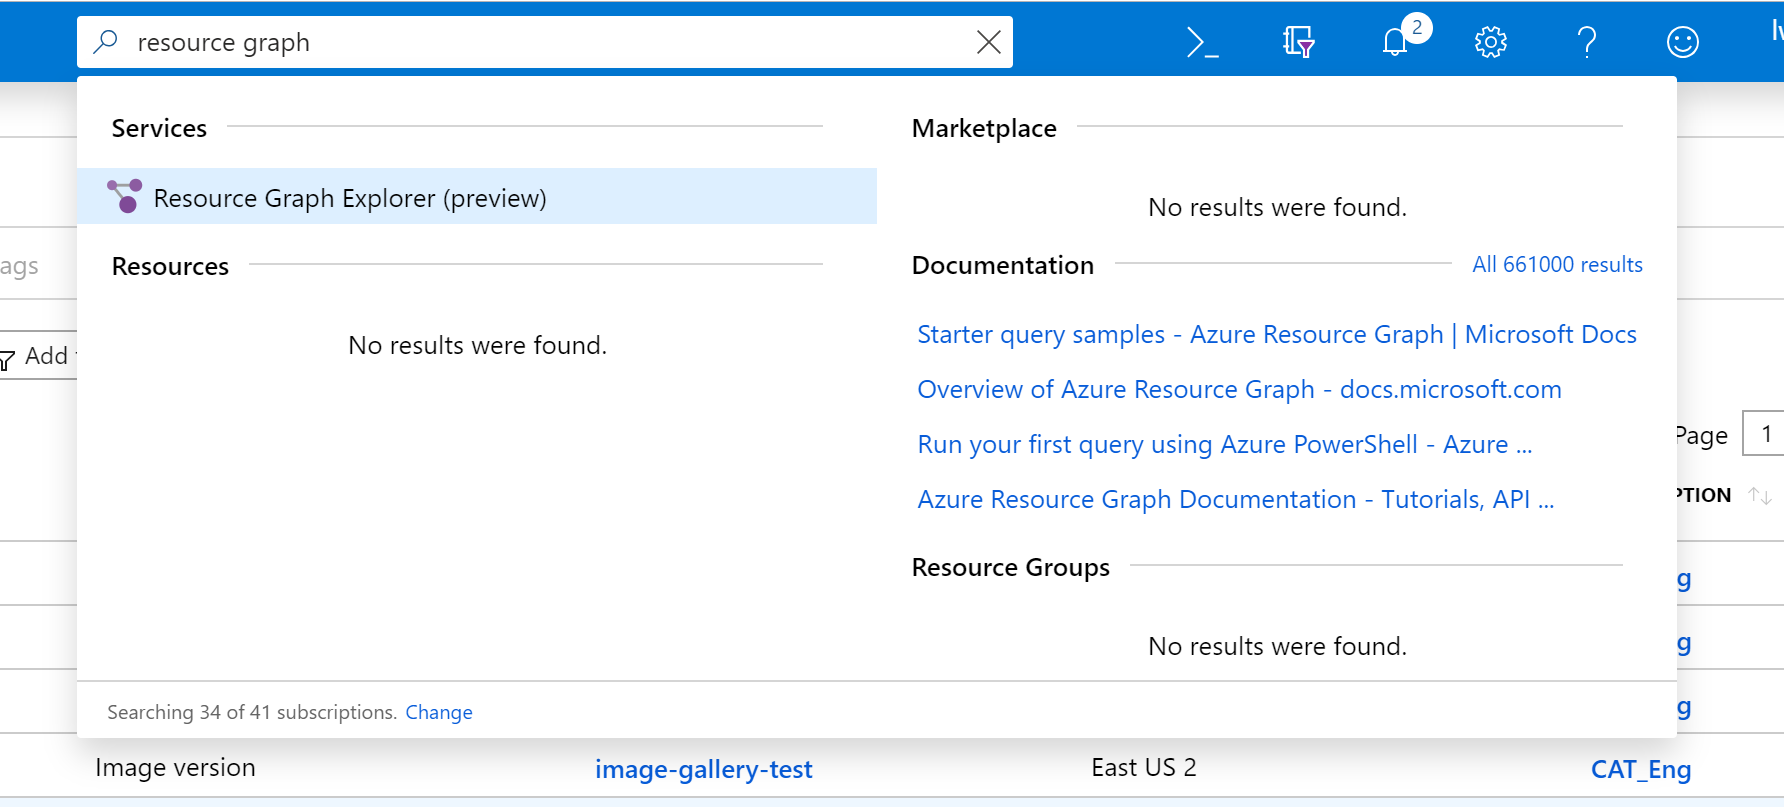 Finding Resource Graph Explorer (preview)